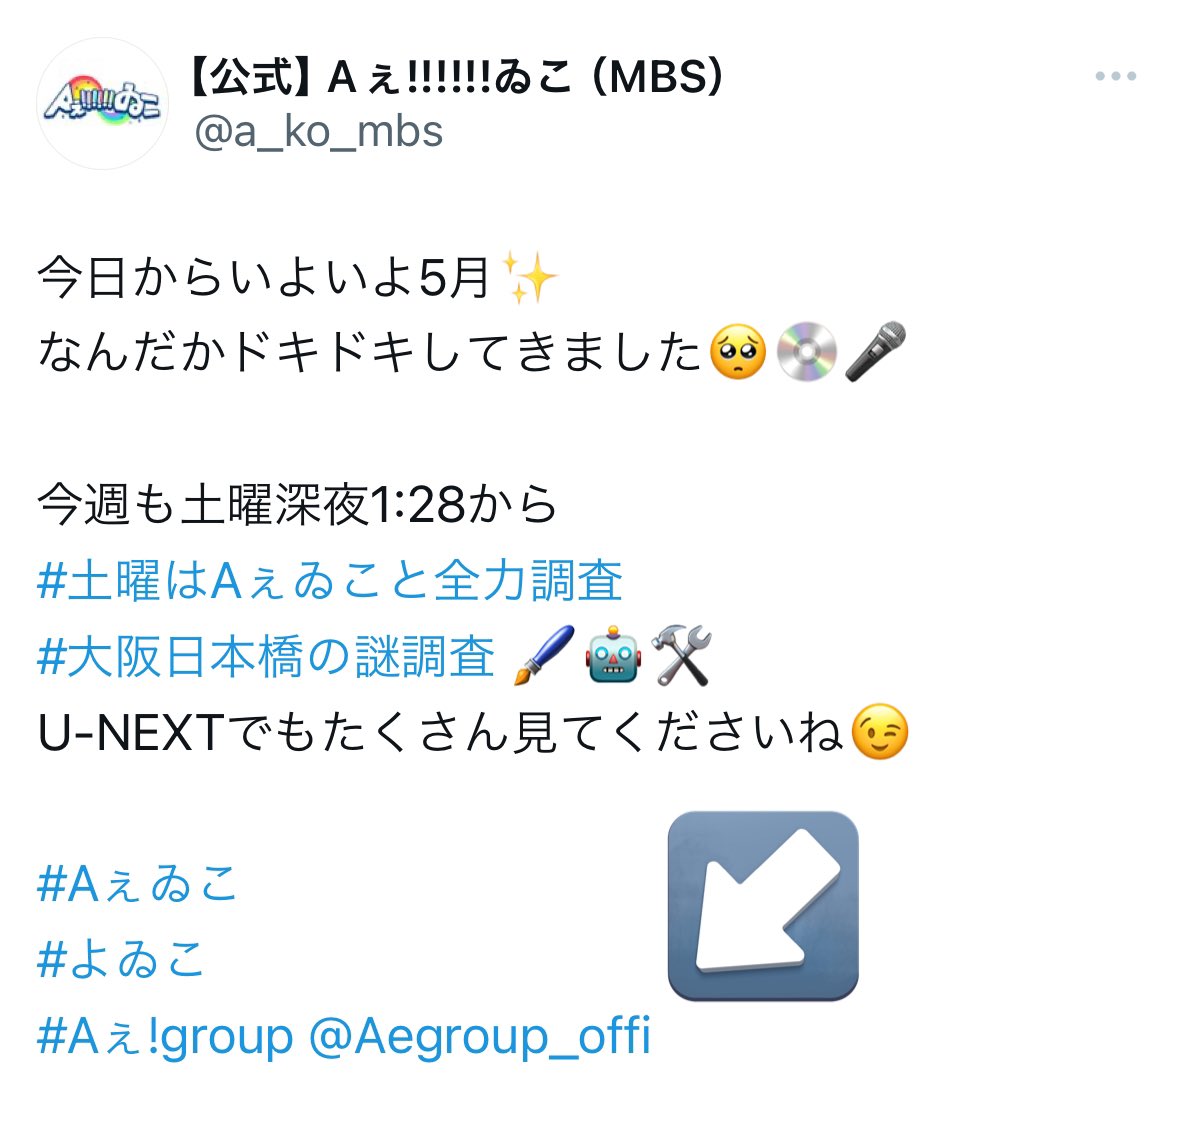 ⚠️ fake account: @Aegroup_offi 

Please block and report!!!